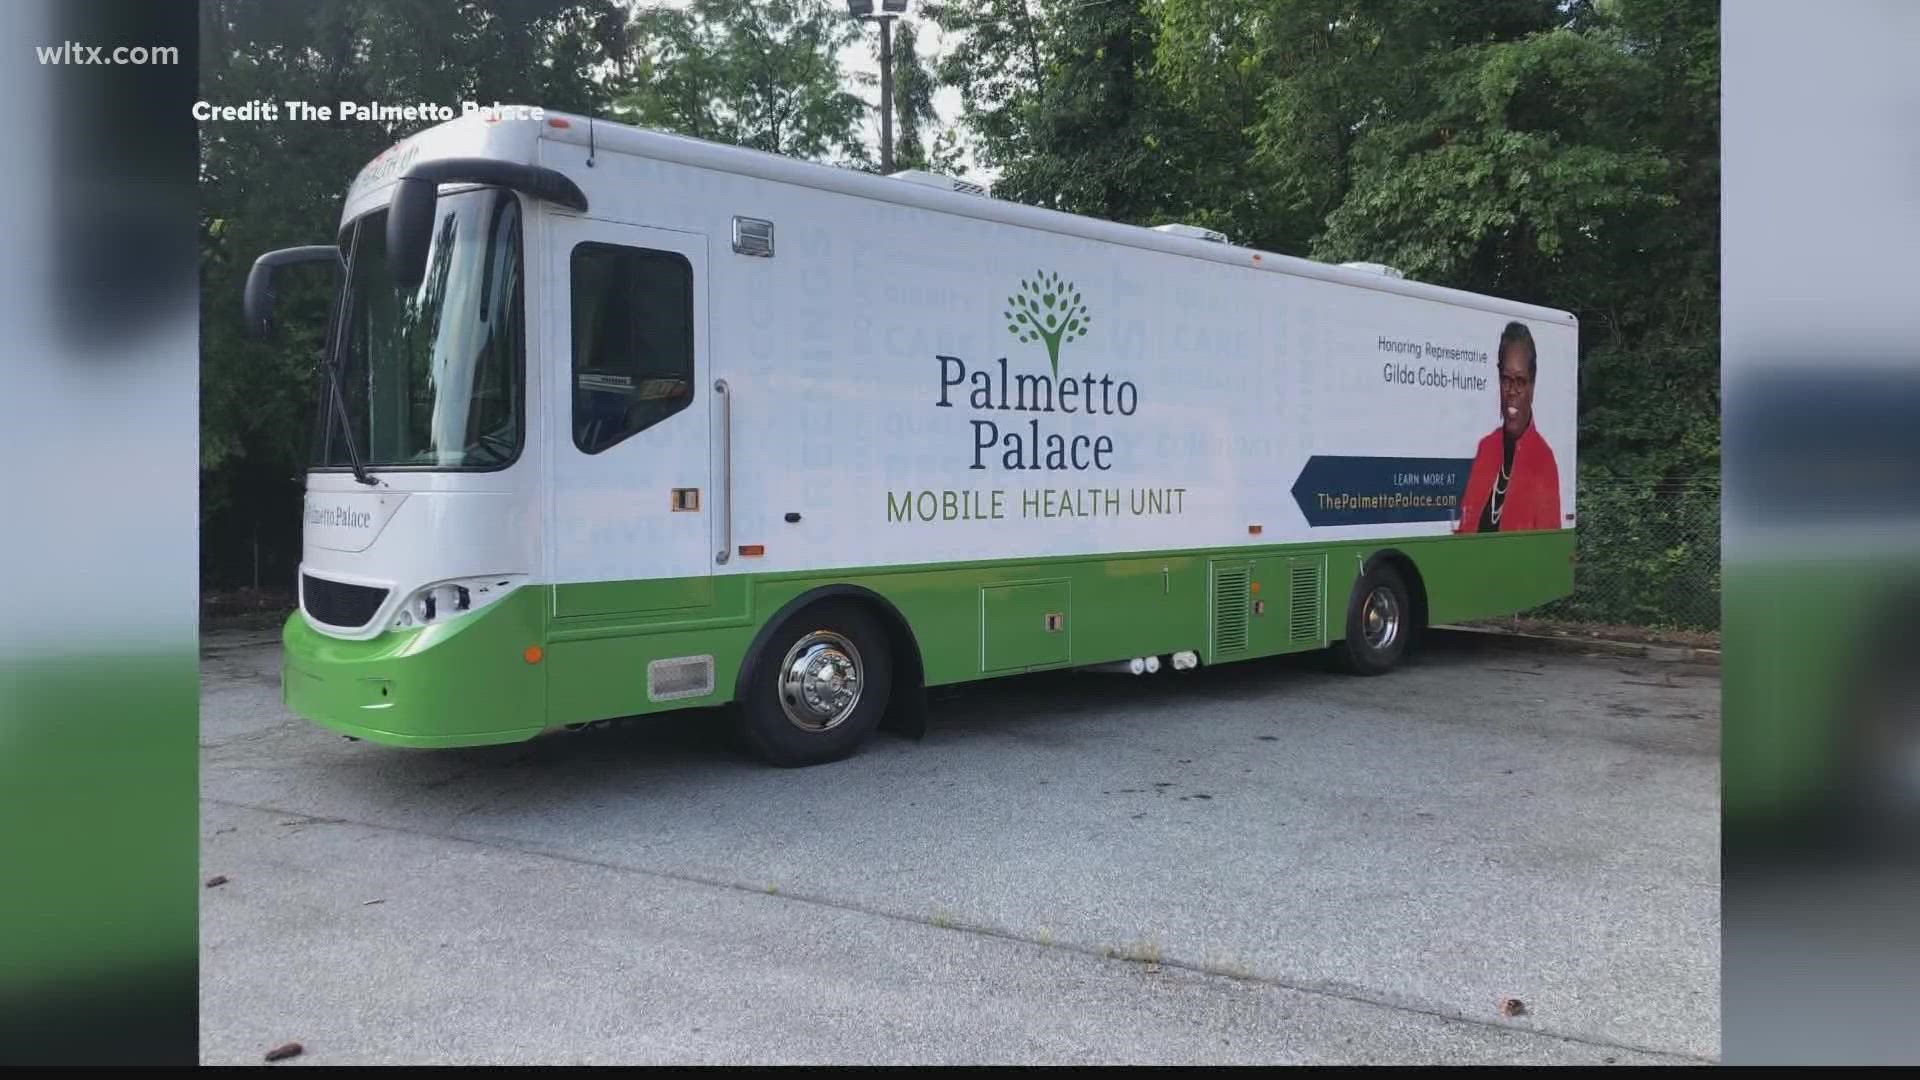 The services are being offered by Palmetto Palace on Saturday-services include diabetes, hypertension, asthma.